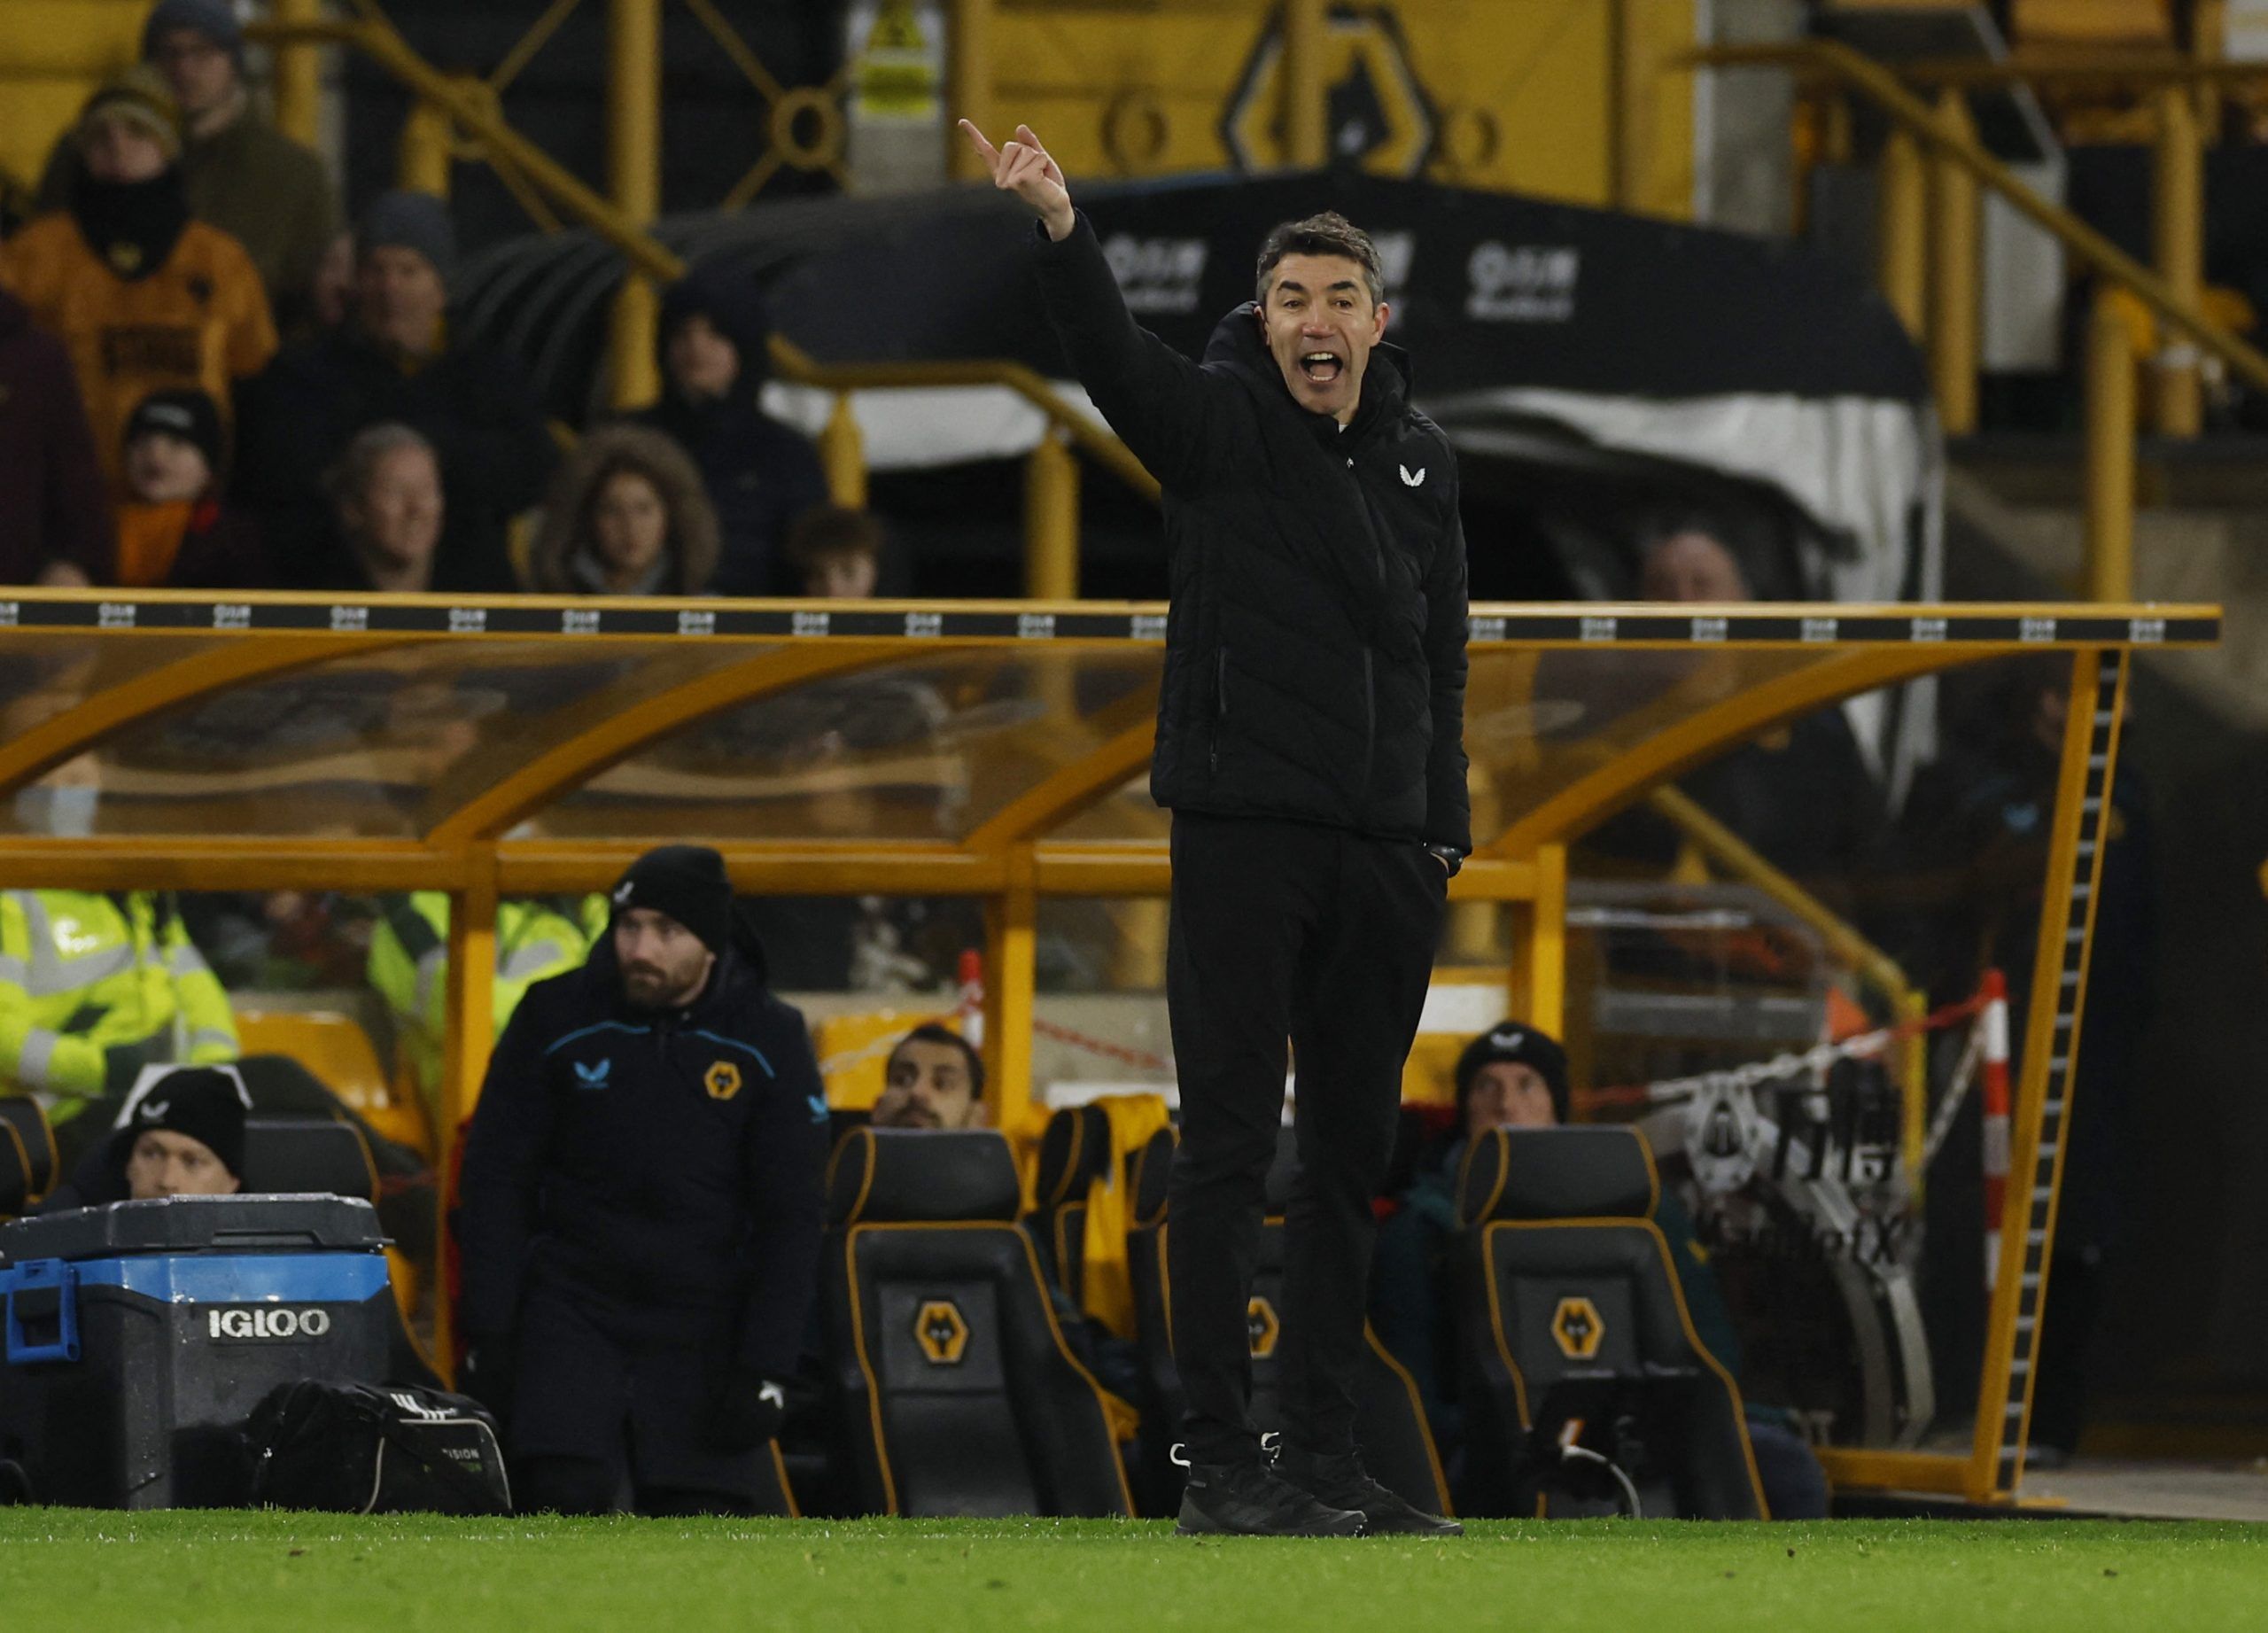 Bruno Lage, Fosun, Jeff Shi, Molineux, The Old Gold, Wolves, Wolves fans, Wolves info, Wolves latest, Wolves news, Wolves updates, WWFC, WWFC news, WWFC update, Premier League, Premier League news, Wolverhampton Wanderers, Watford, Predicted XI, 
